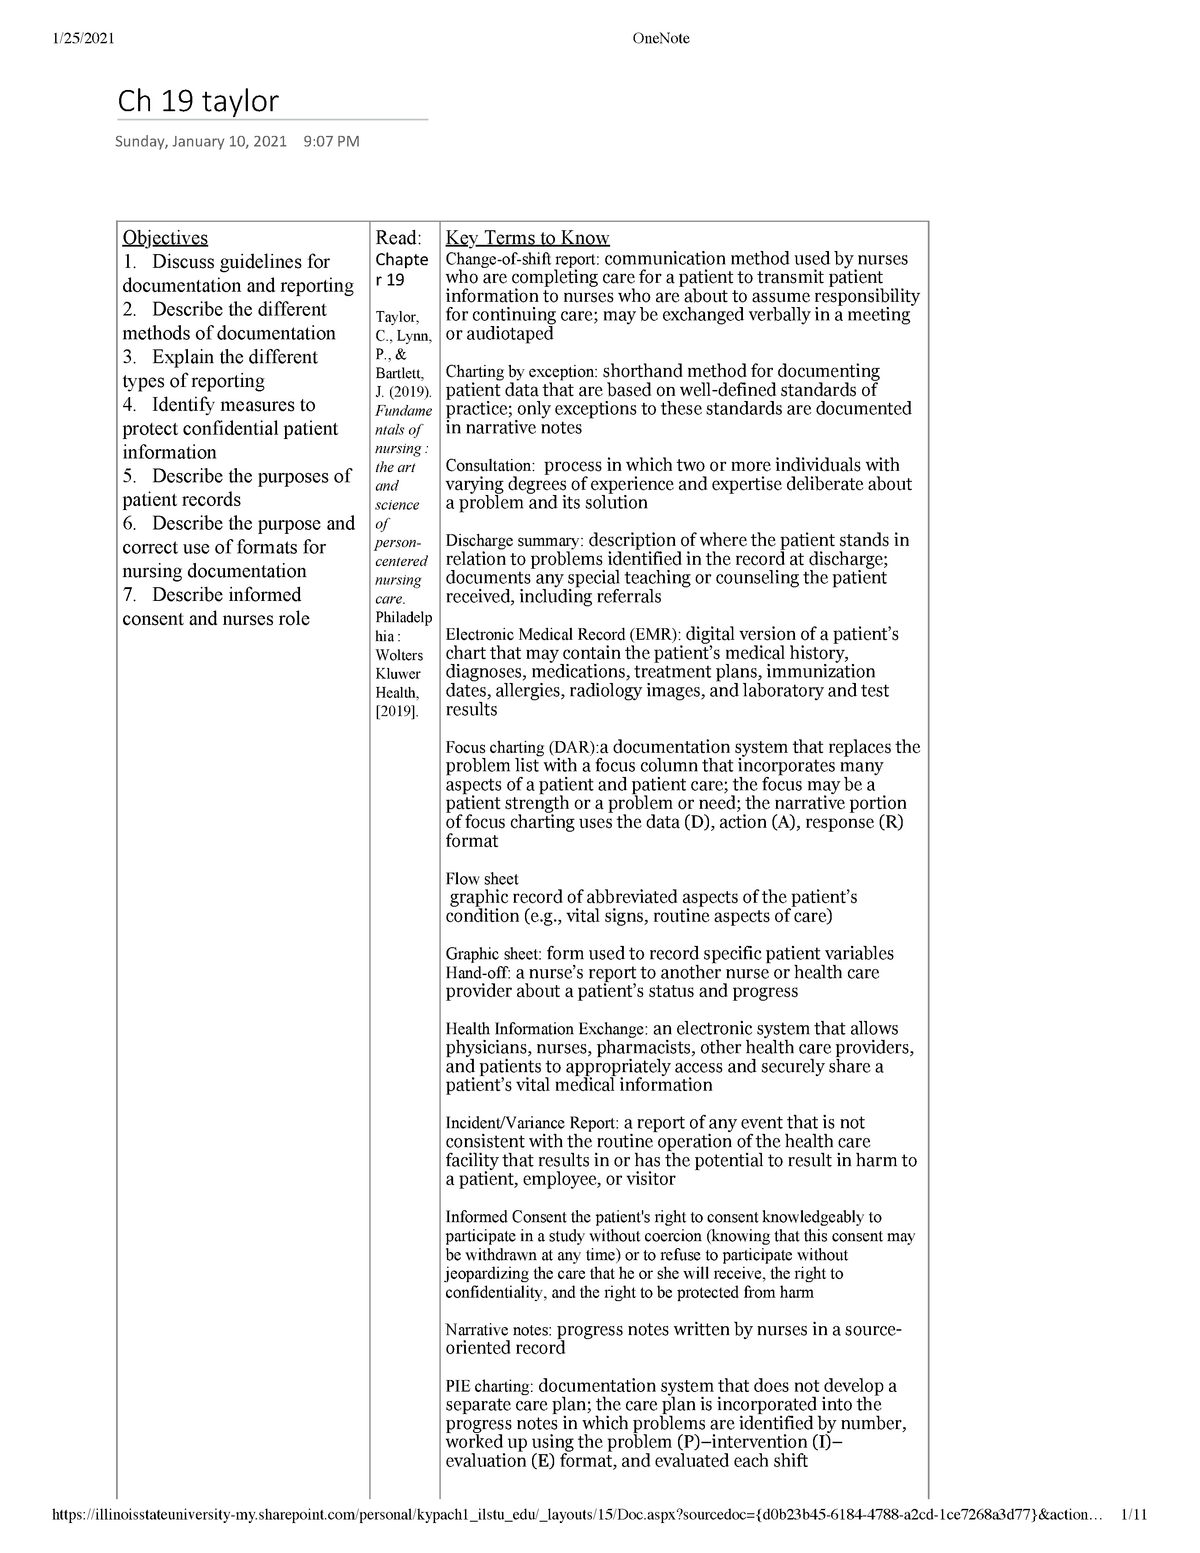 medical charting examples for teaching